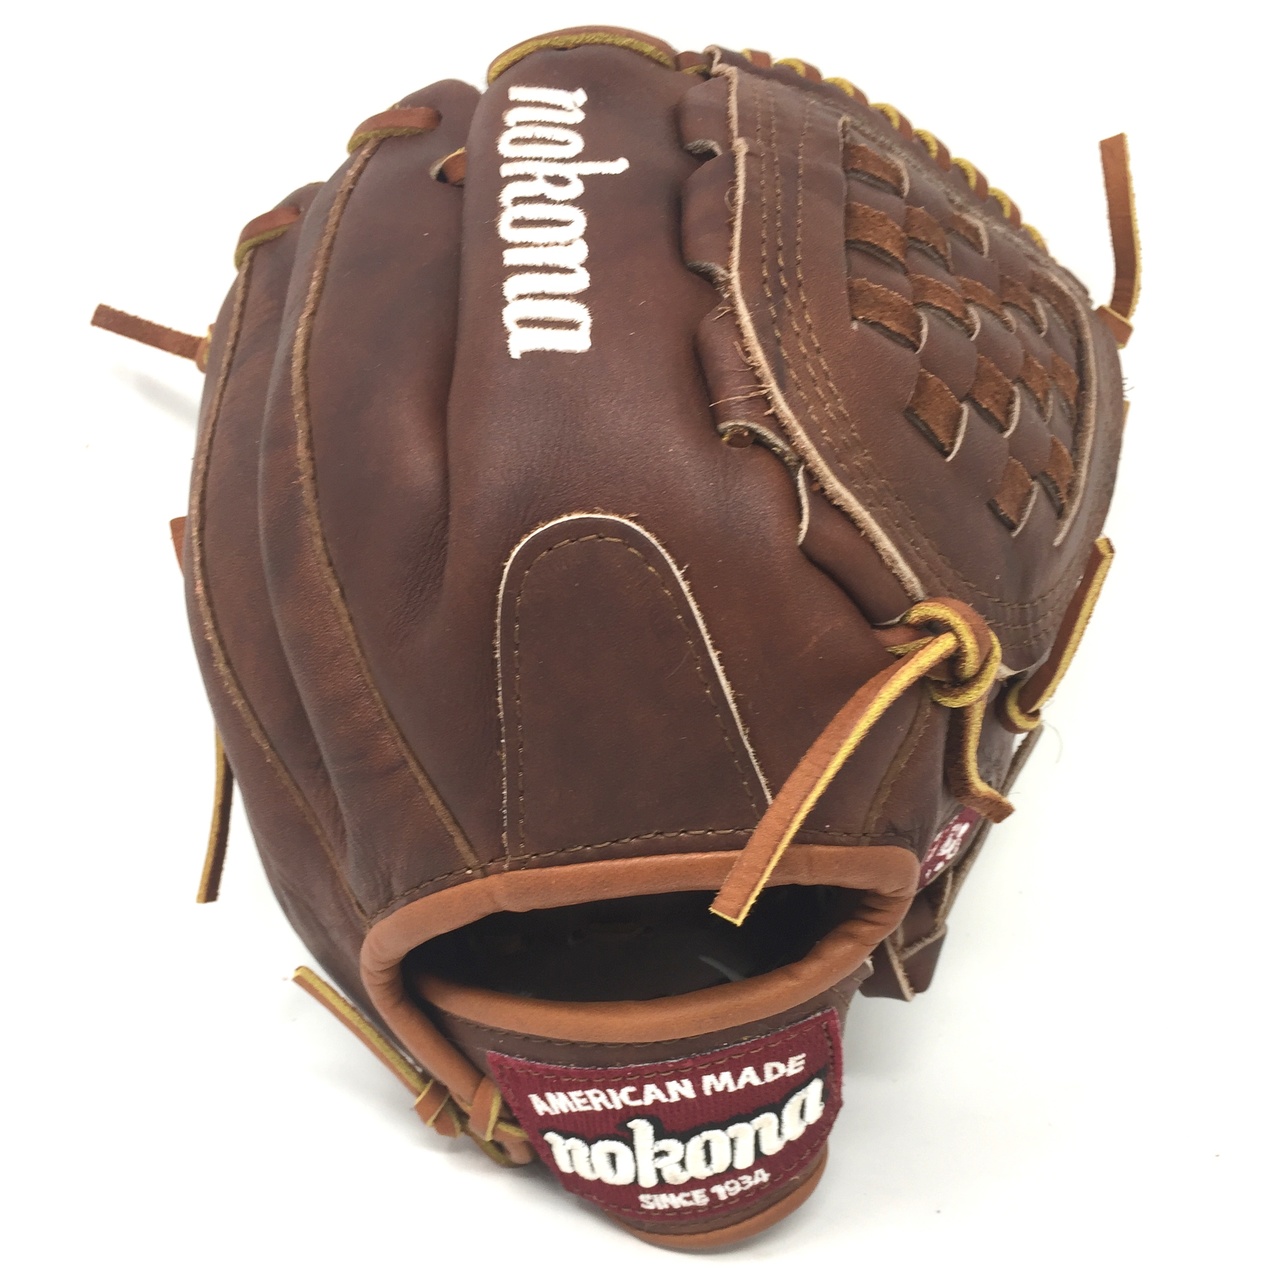 Made in USA    Nokona Classic Walnut Youth Baseball Glove. 10.5 inch with closed basket web. Open Back. Red old school wrist patch. Finger Pad. American Flag. Make in Nokona, TX. This glove is for players under 12 that still want the same high quality Nokona walnut crunch leather used in the adult gloves.